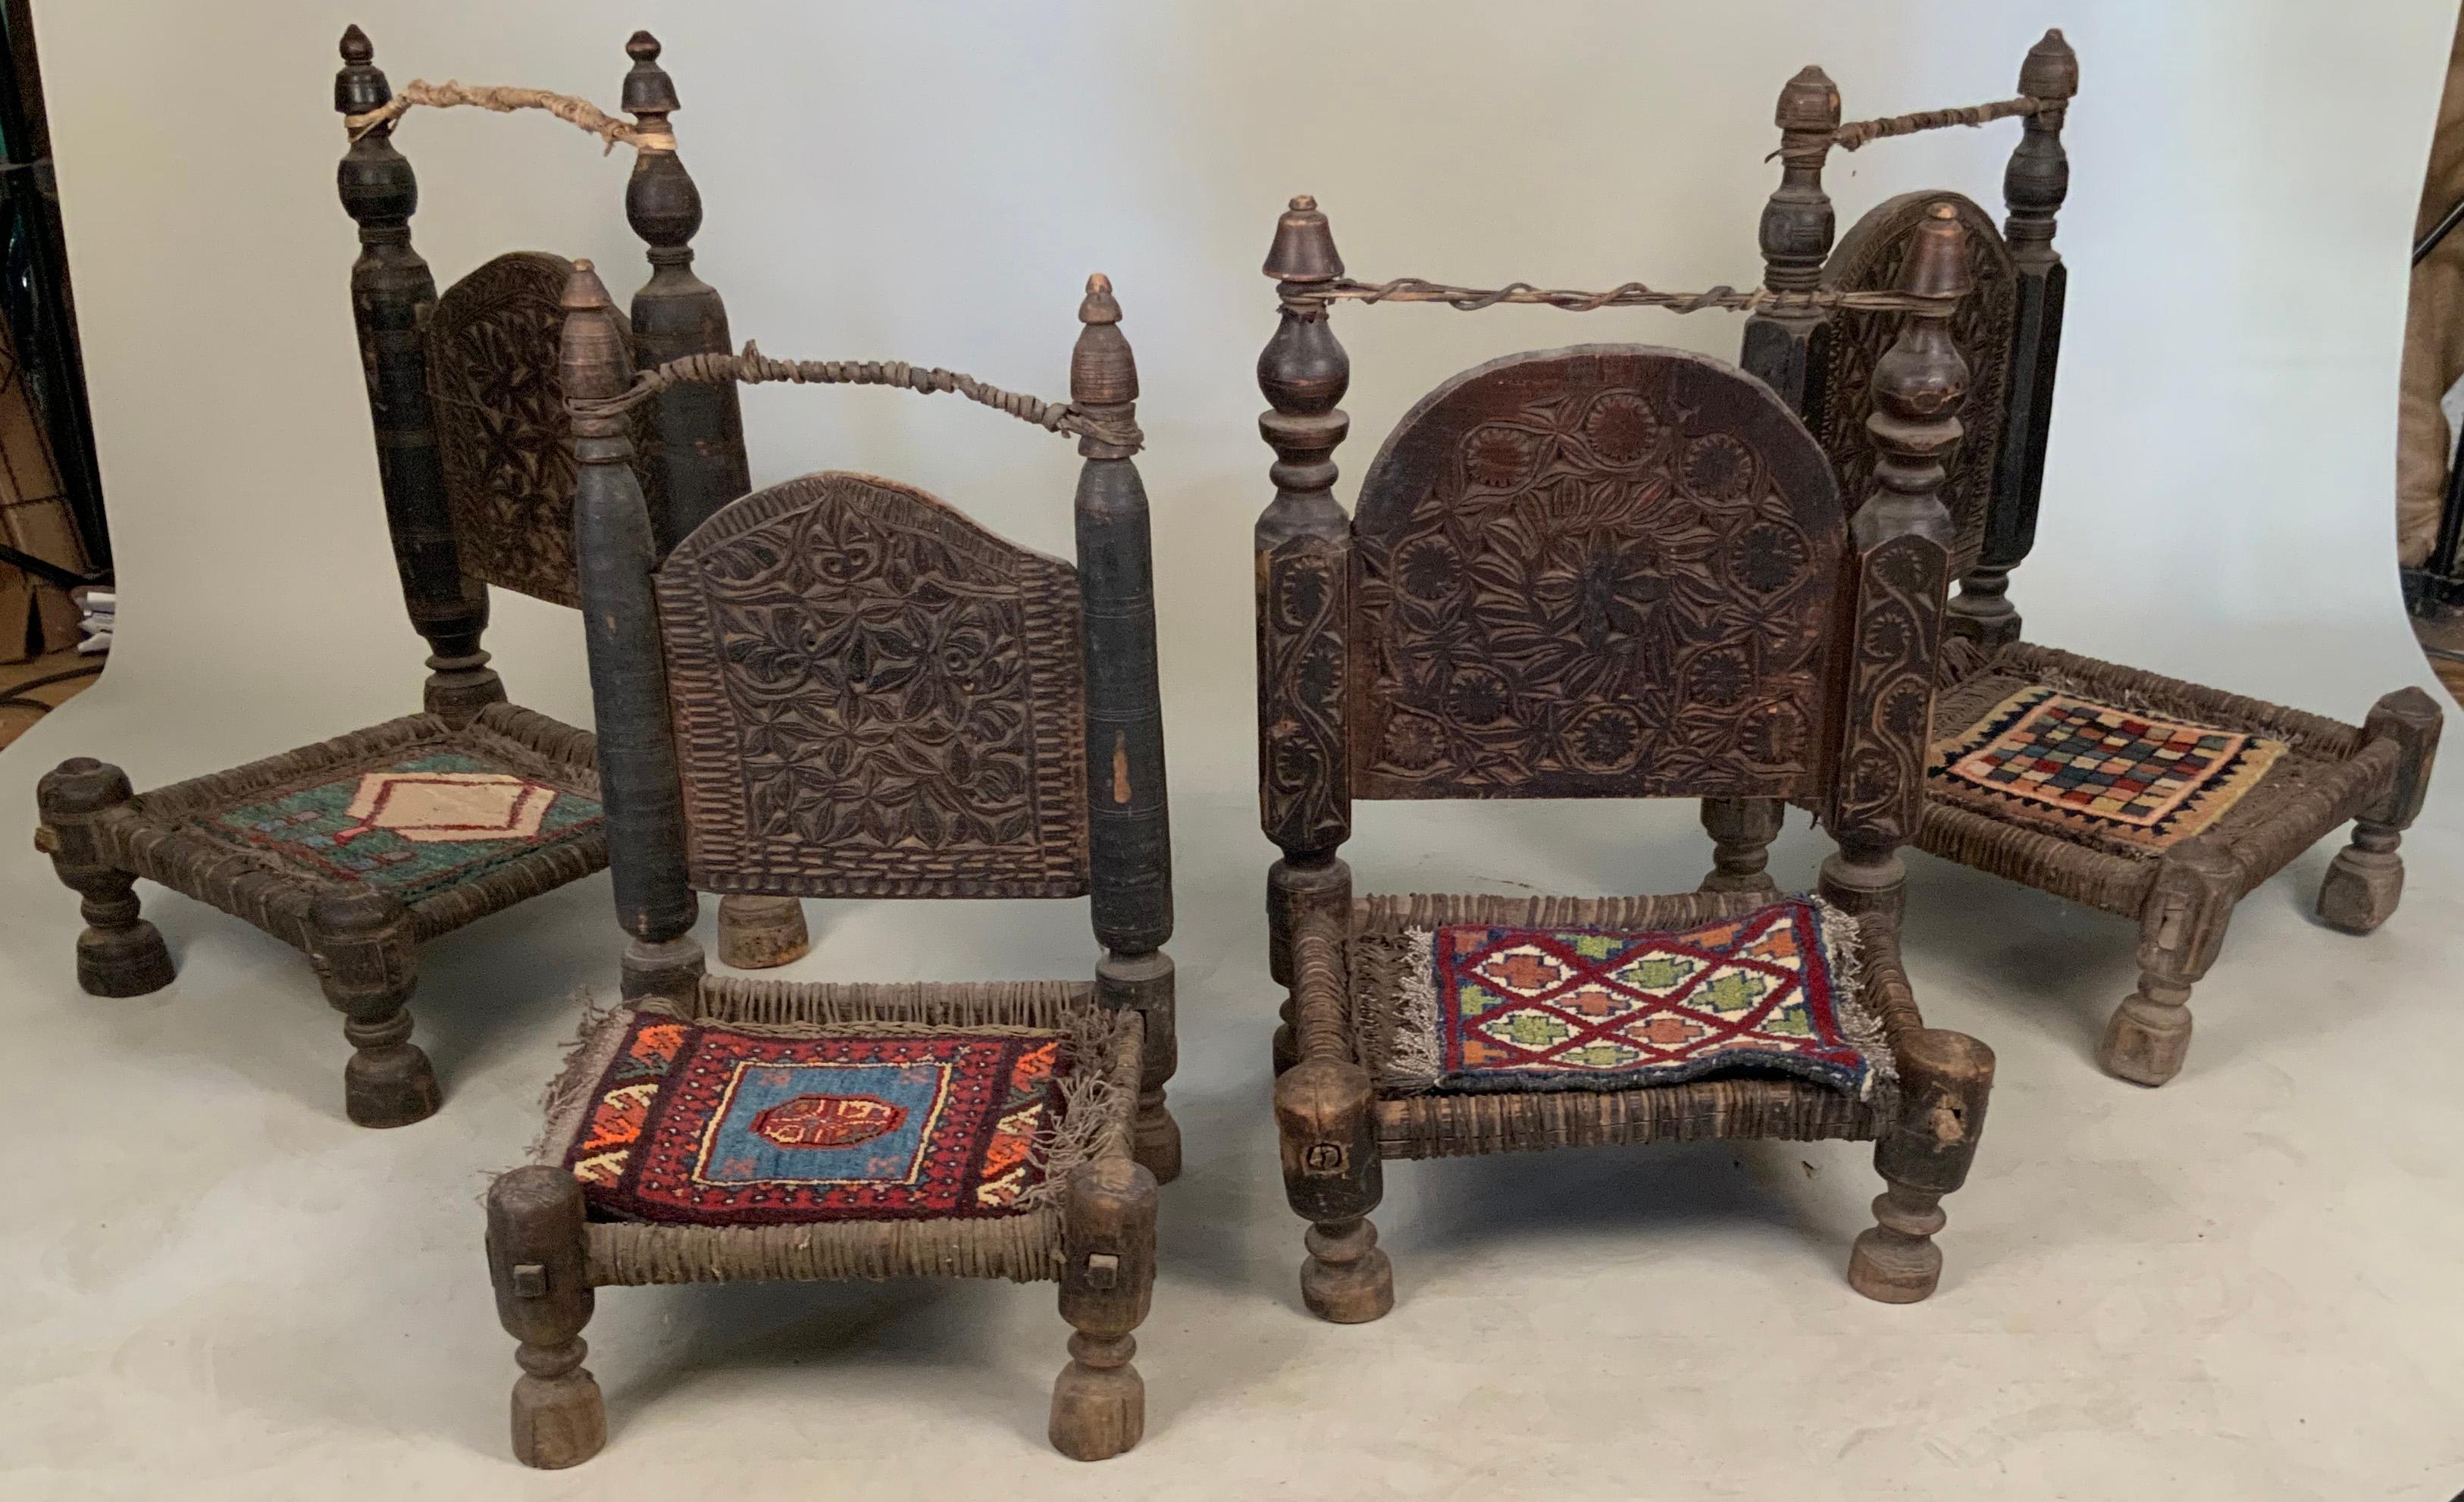 An amazing set of four antique 19th century tribal bedouin chairs from northern Pakistan, with amazing details and the original handwoven small carpet seats. together with their companion small square table.